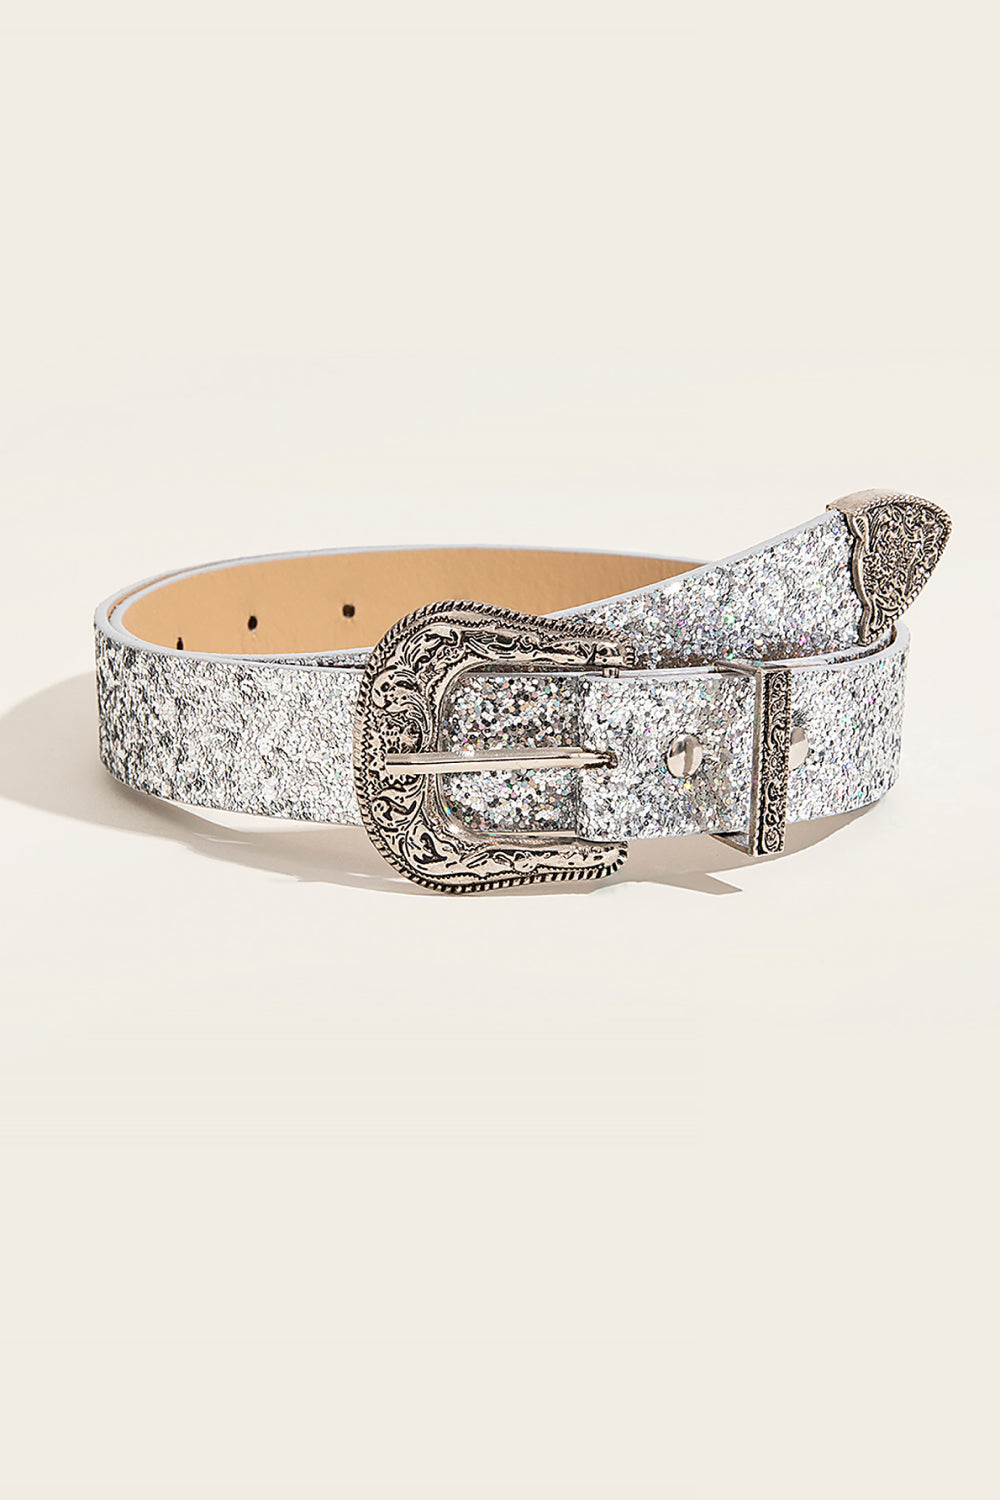 PU Leather Belt - Cheeky Chic Boutique